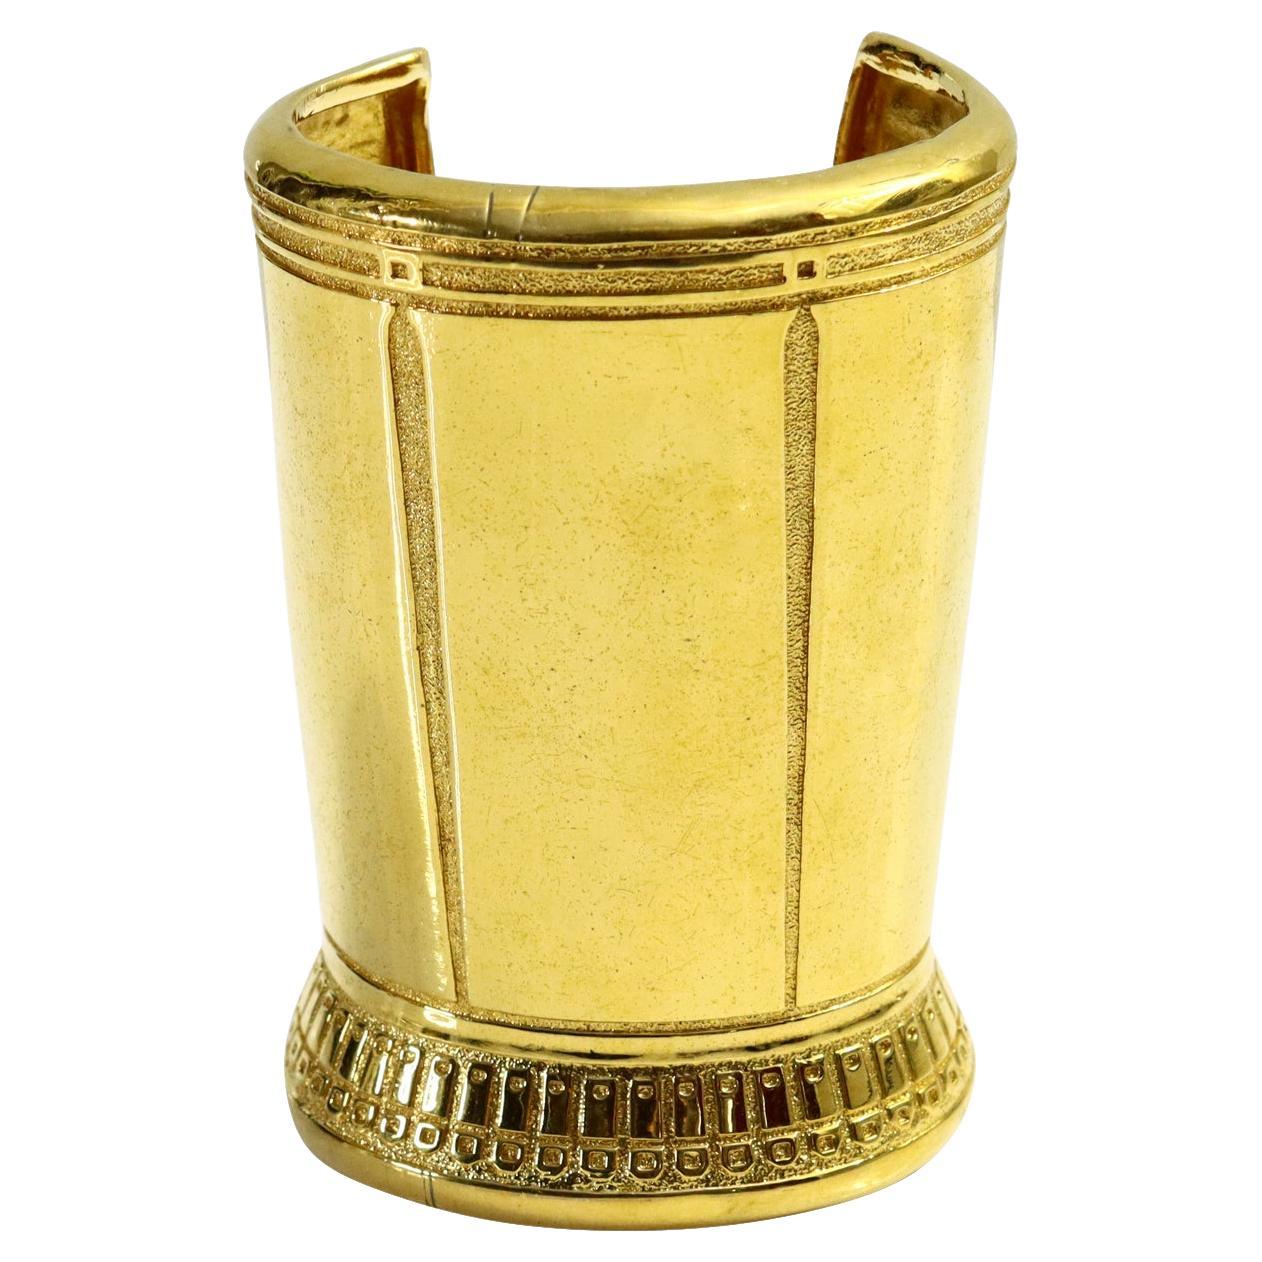 Vintage Karl Lagerfeld Large Gold Tone Cuff Bracelet.  Unsigned and Gorgeous but very Lagerfeld.  Substantial and heavy with lots of detail.  If you are smaller I have a way to make this fit so let me know and I will write you and let you know.  I